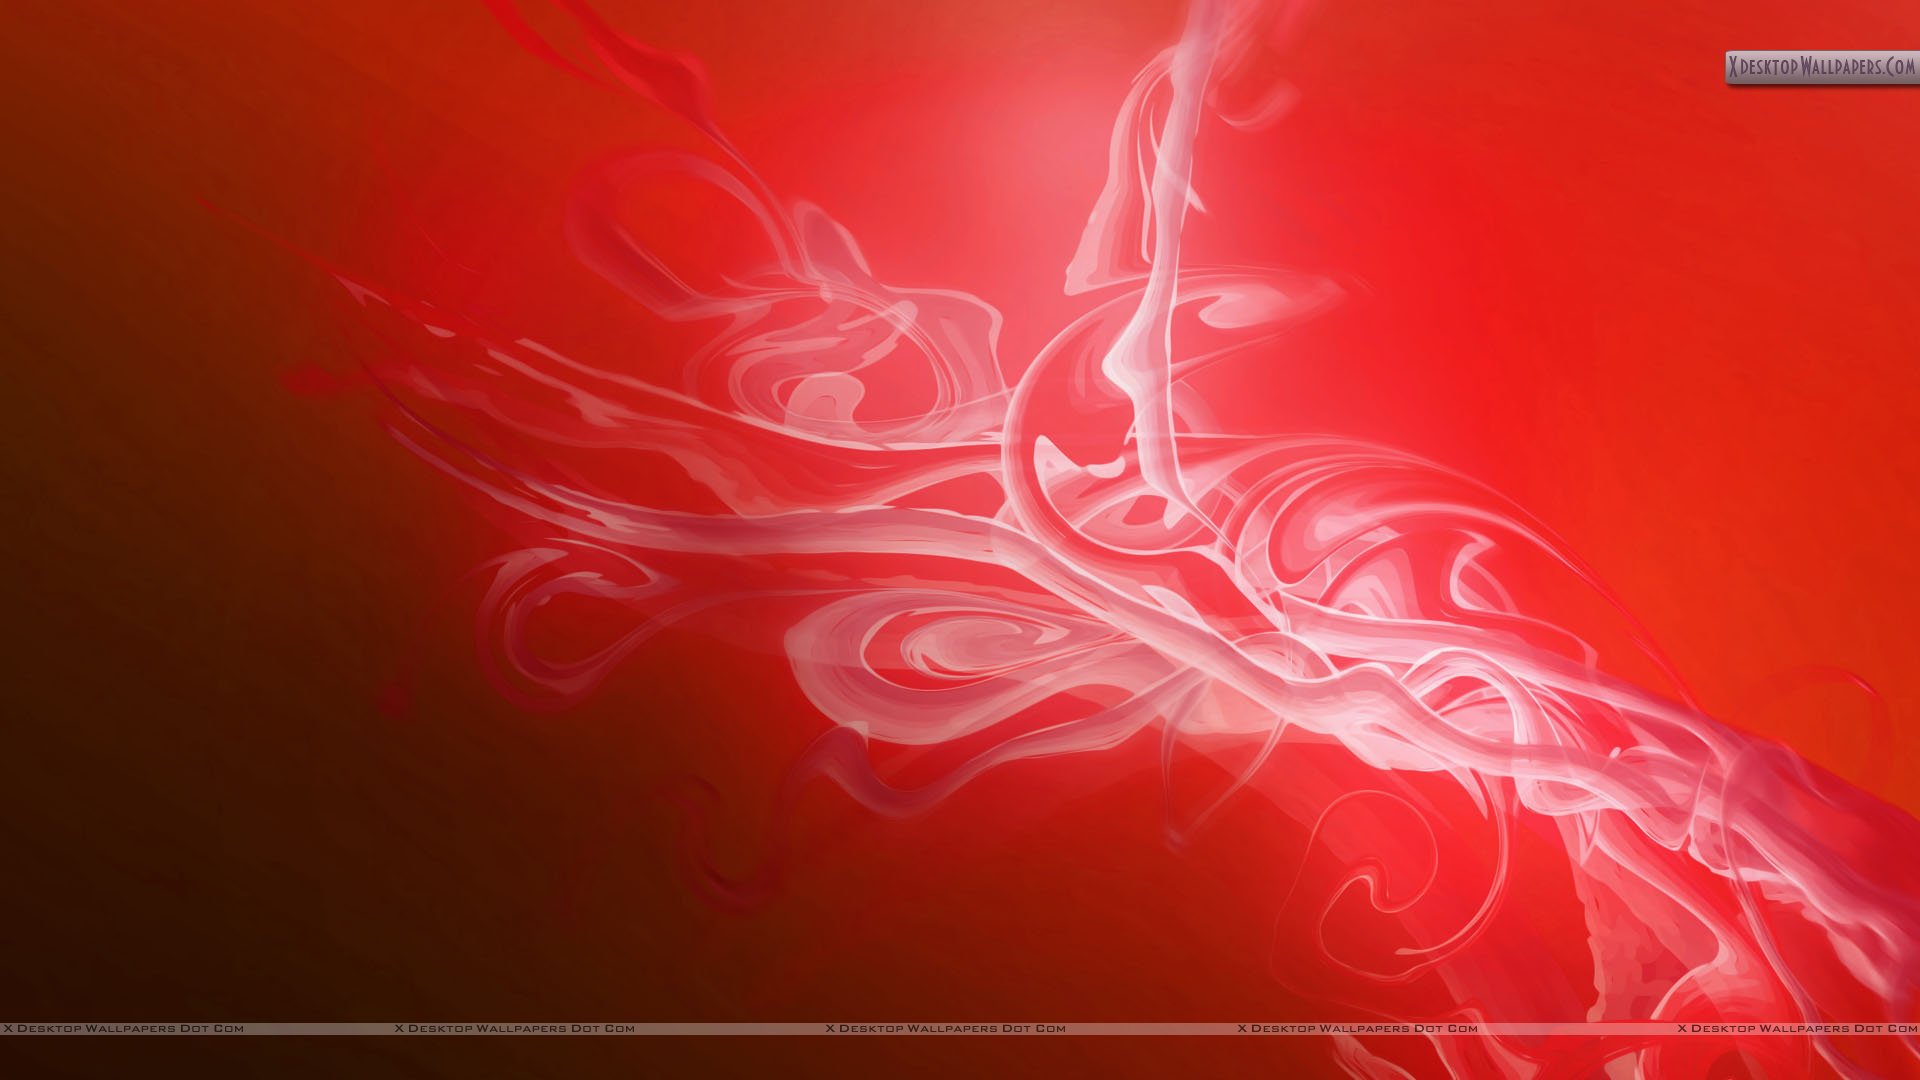 [49+] Red and White Wallpaper Backgrounds on WallpaperSafari